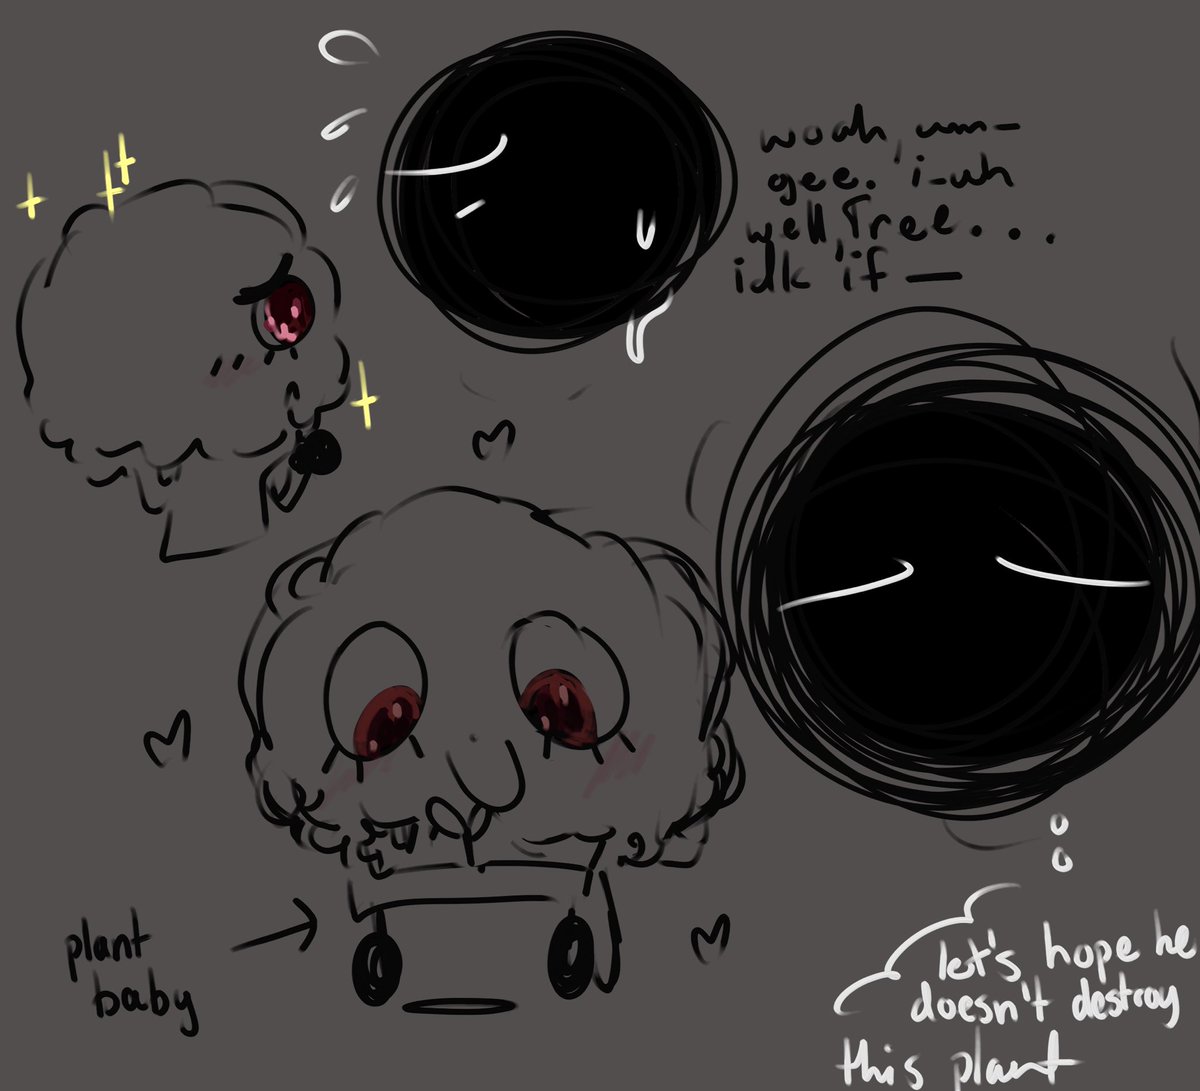 // astrobiology 
.
.
.
.
can we feed these two aboniki?? /silly